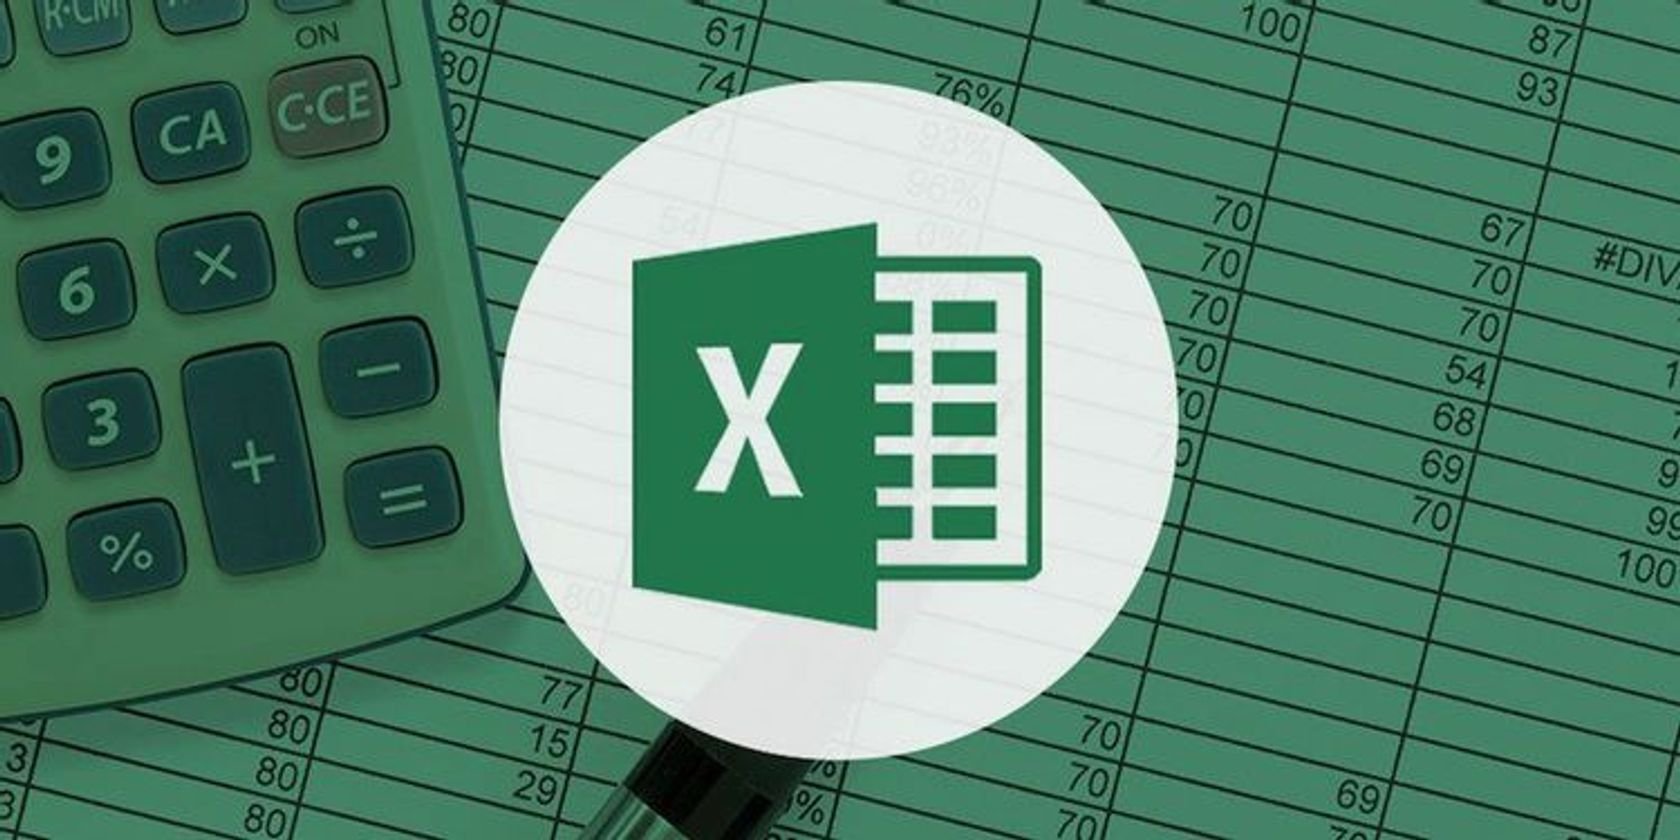 How to Add Numbers in Excel With the Sum Function